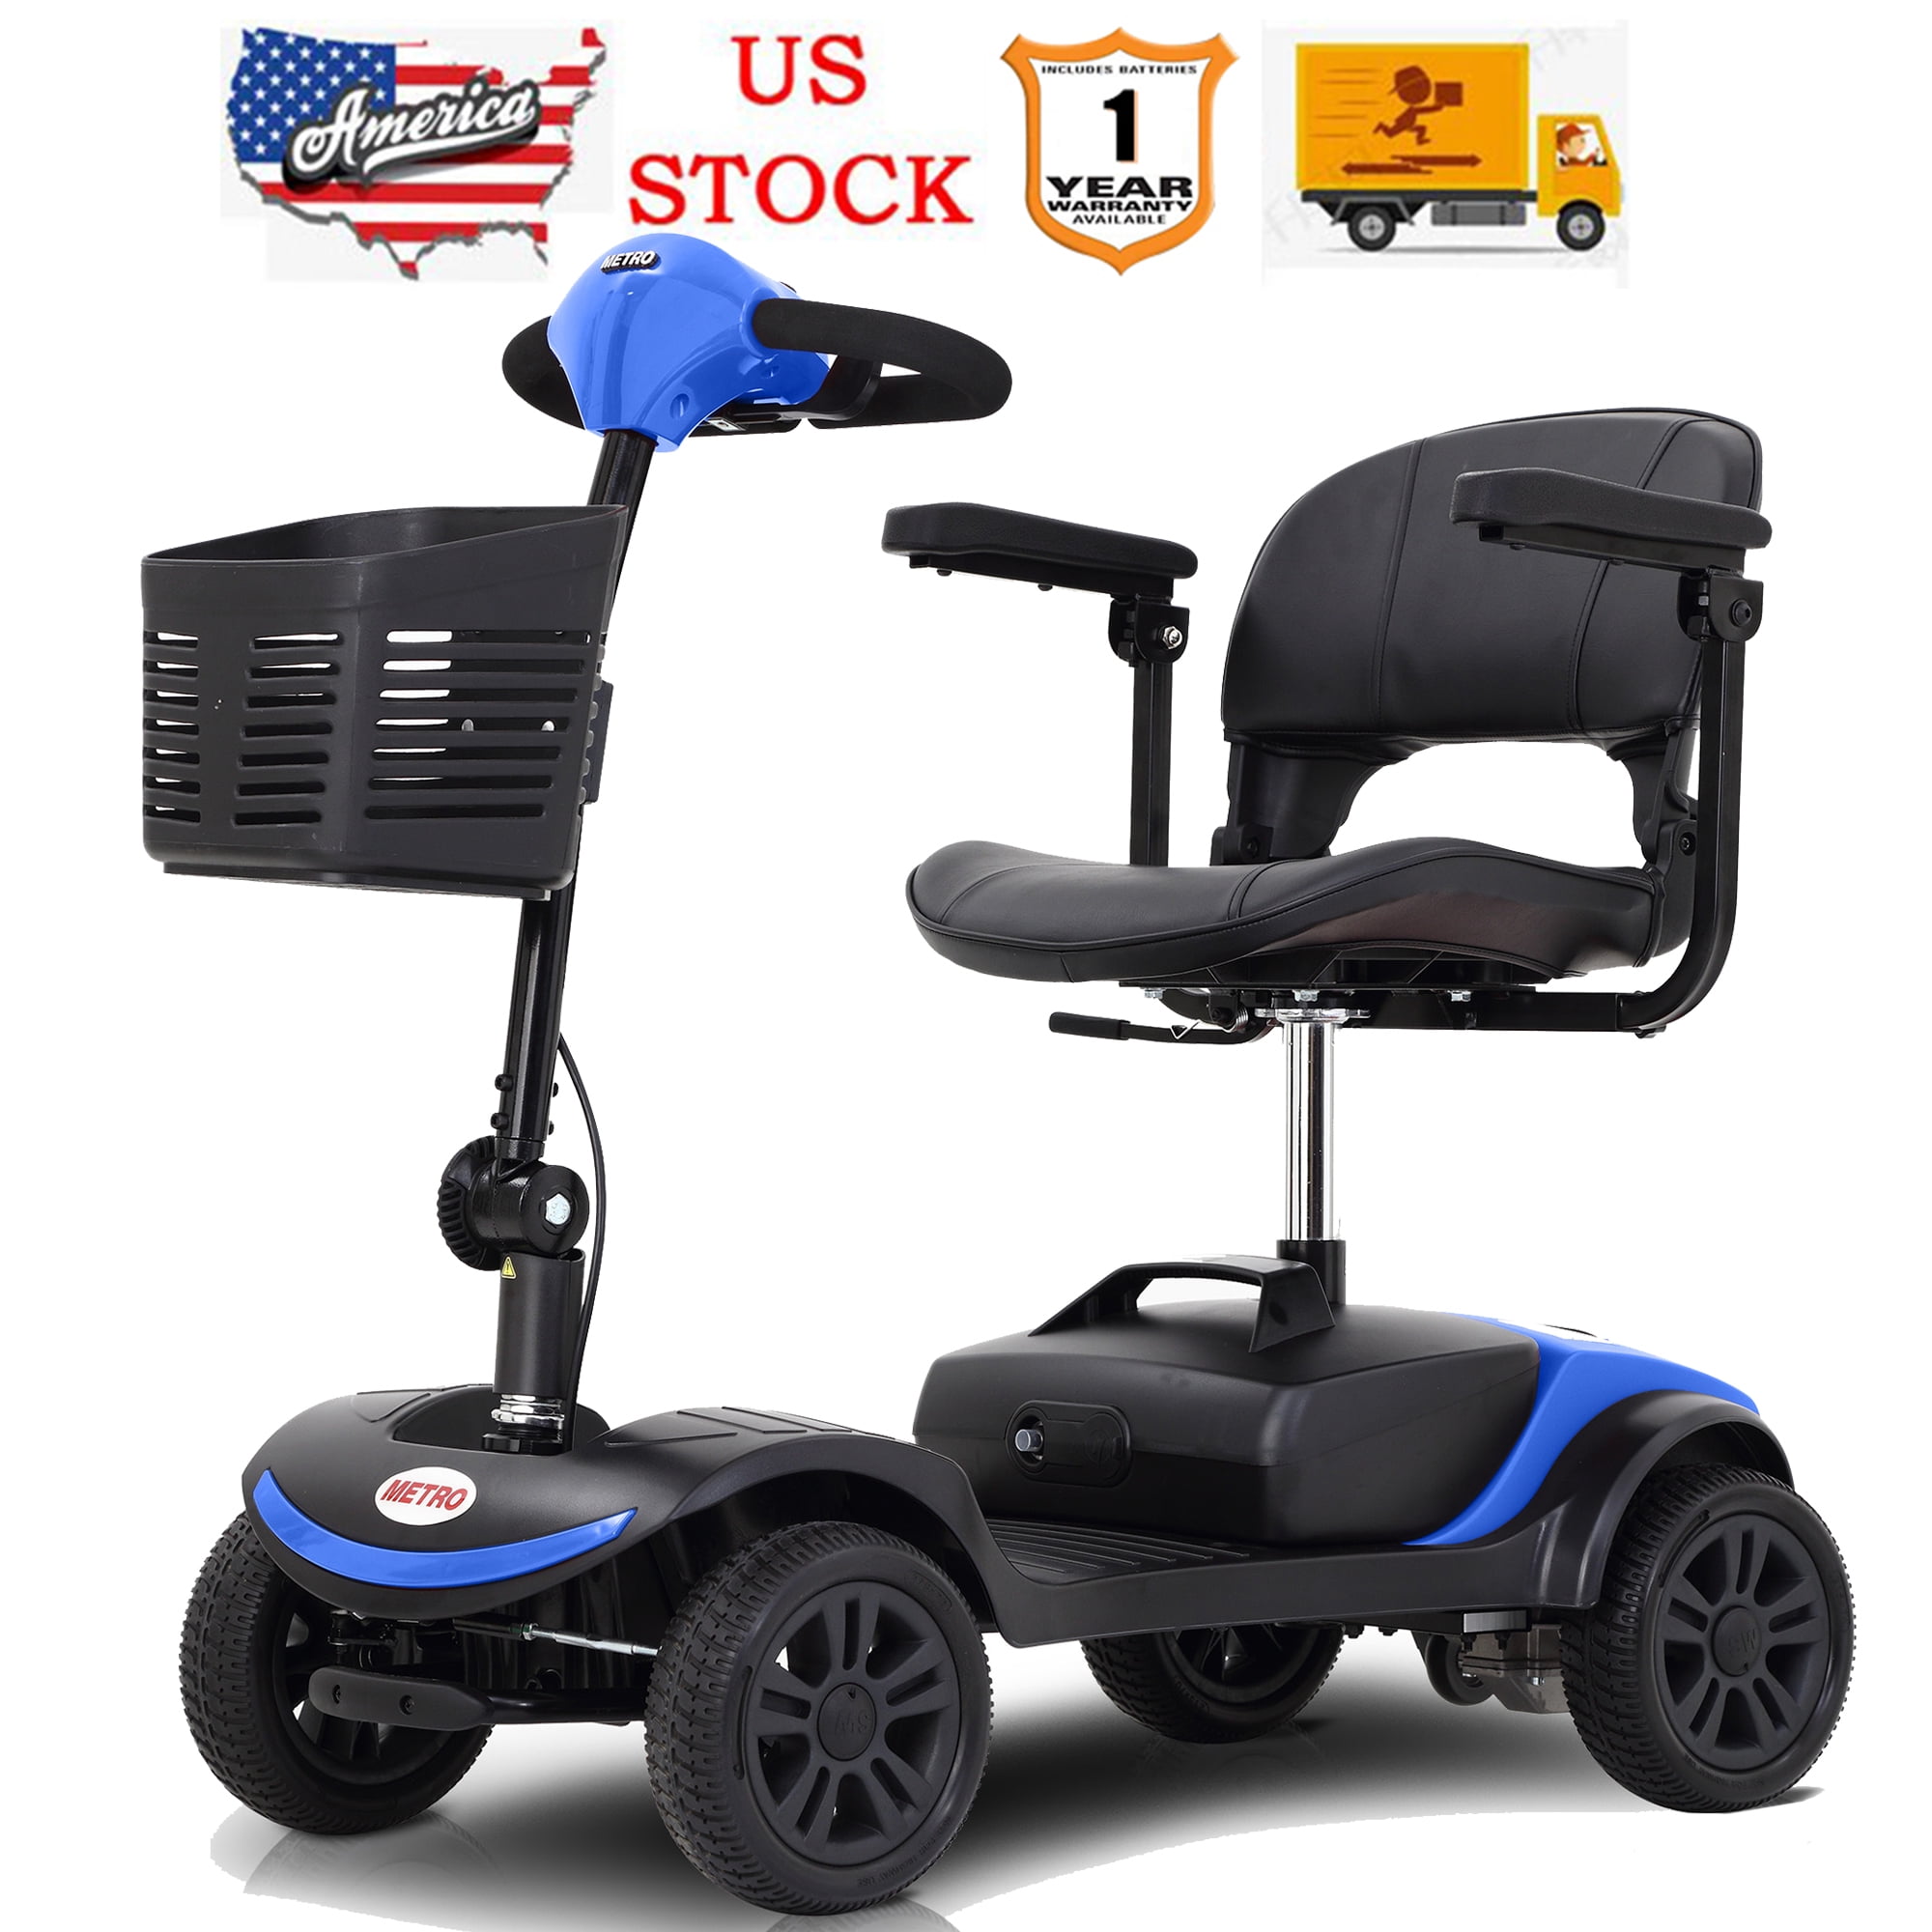 violinist Souvenir barbering 4 Wheel Mobility Scooter, Heavy Duty Electric Motorized Scooters for  Seniors, Long Travel Lightweight Compact Scooter with 360° Swivel Seat,  Outdoor Power Scooter With Anti-Tip Tires, Blue, SS543 - Walmart.com